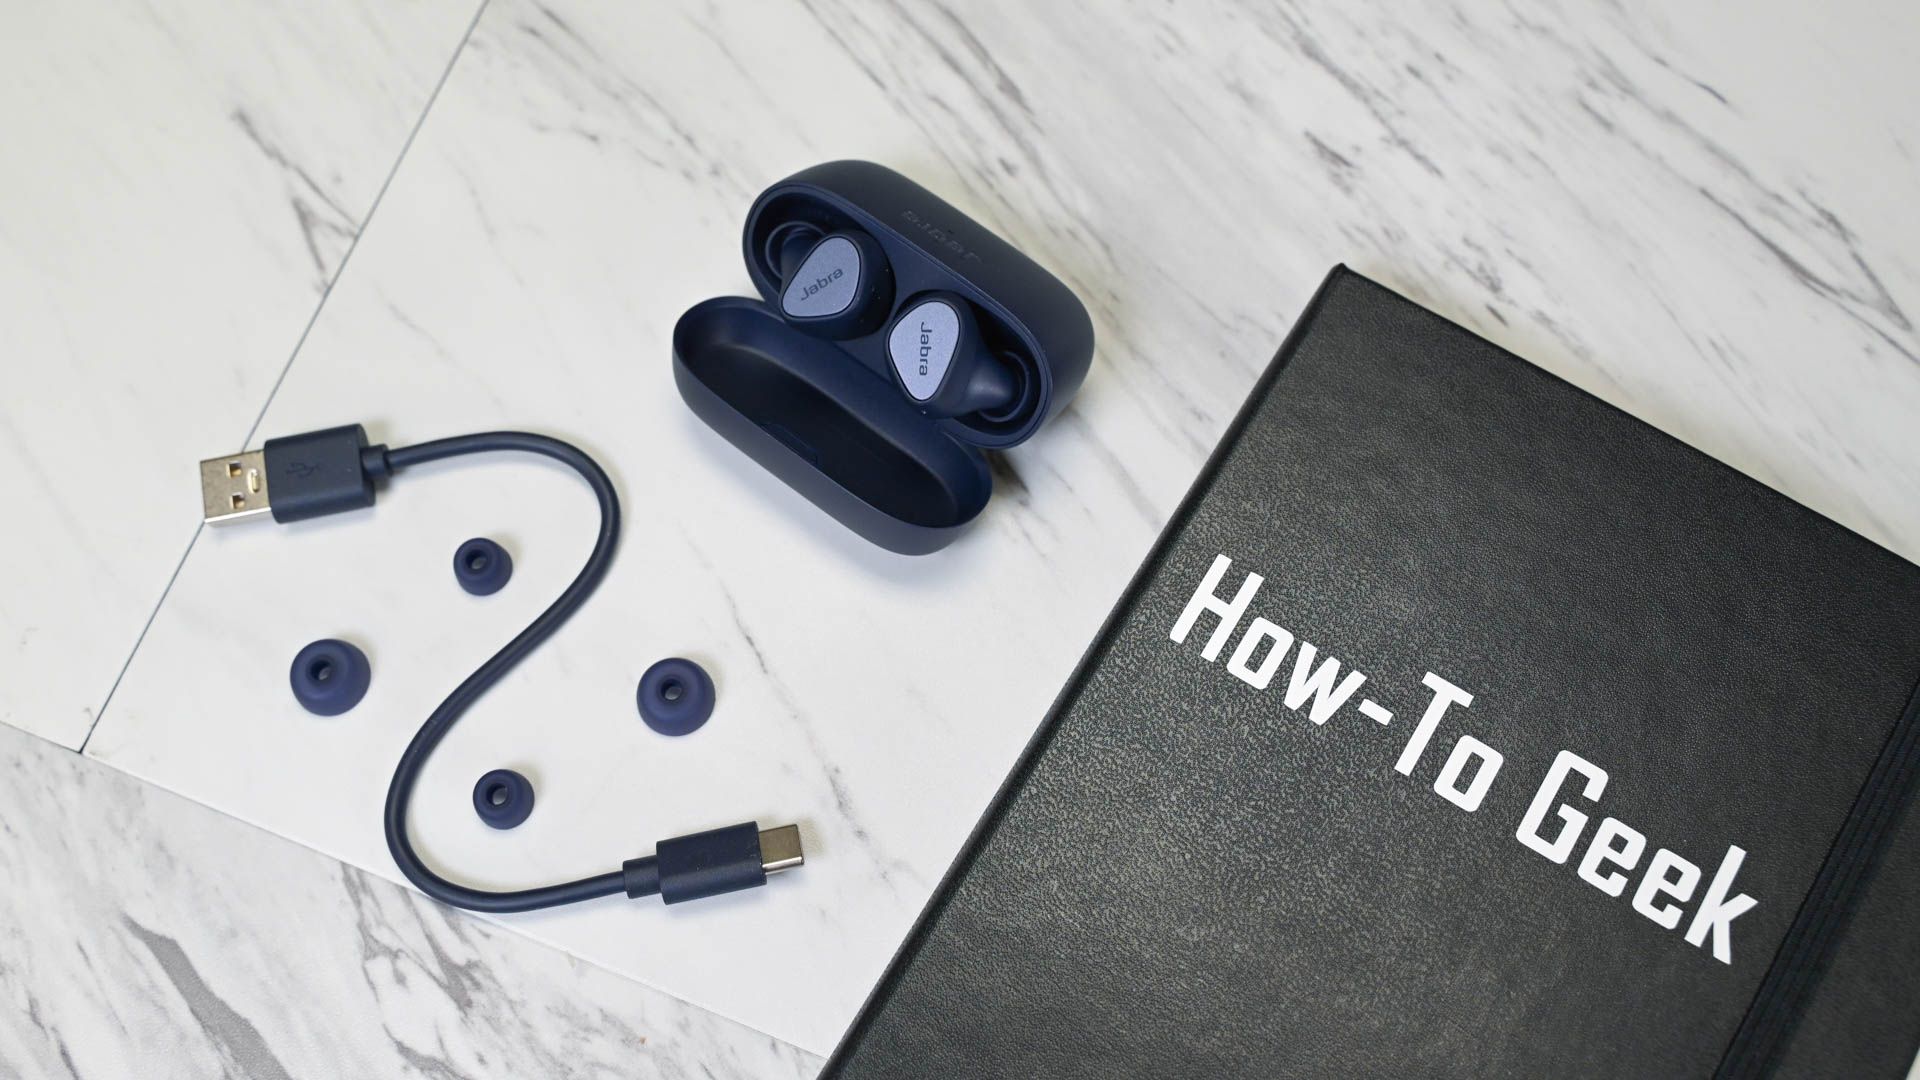 Jabra Elite 4 ear tips and cable next to a HTG notebook